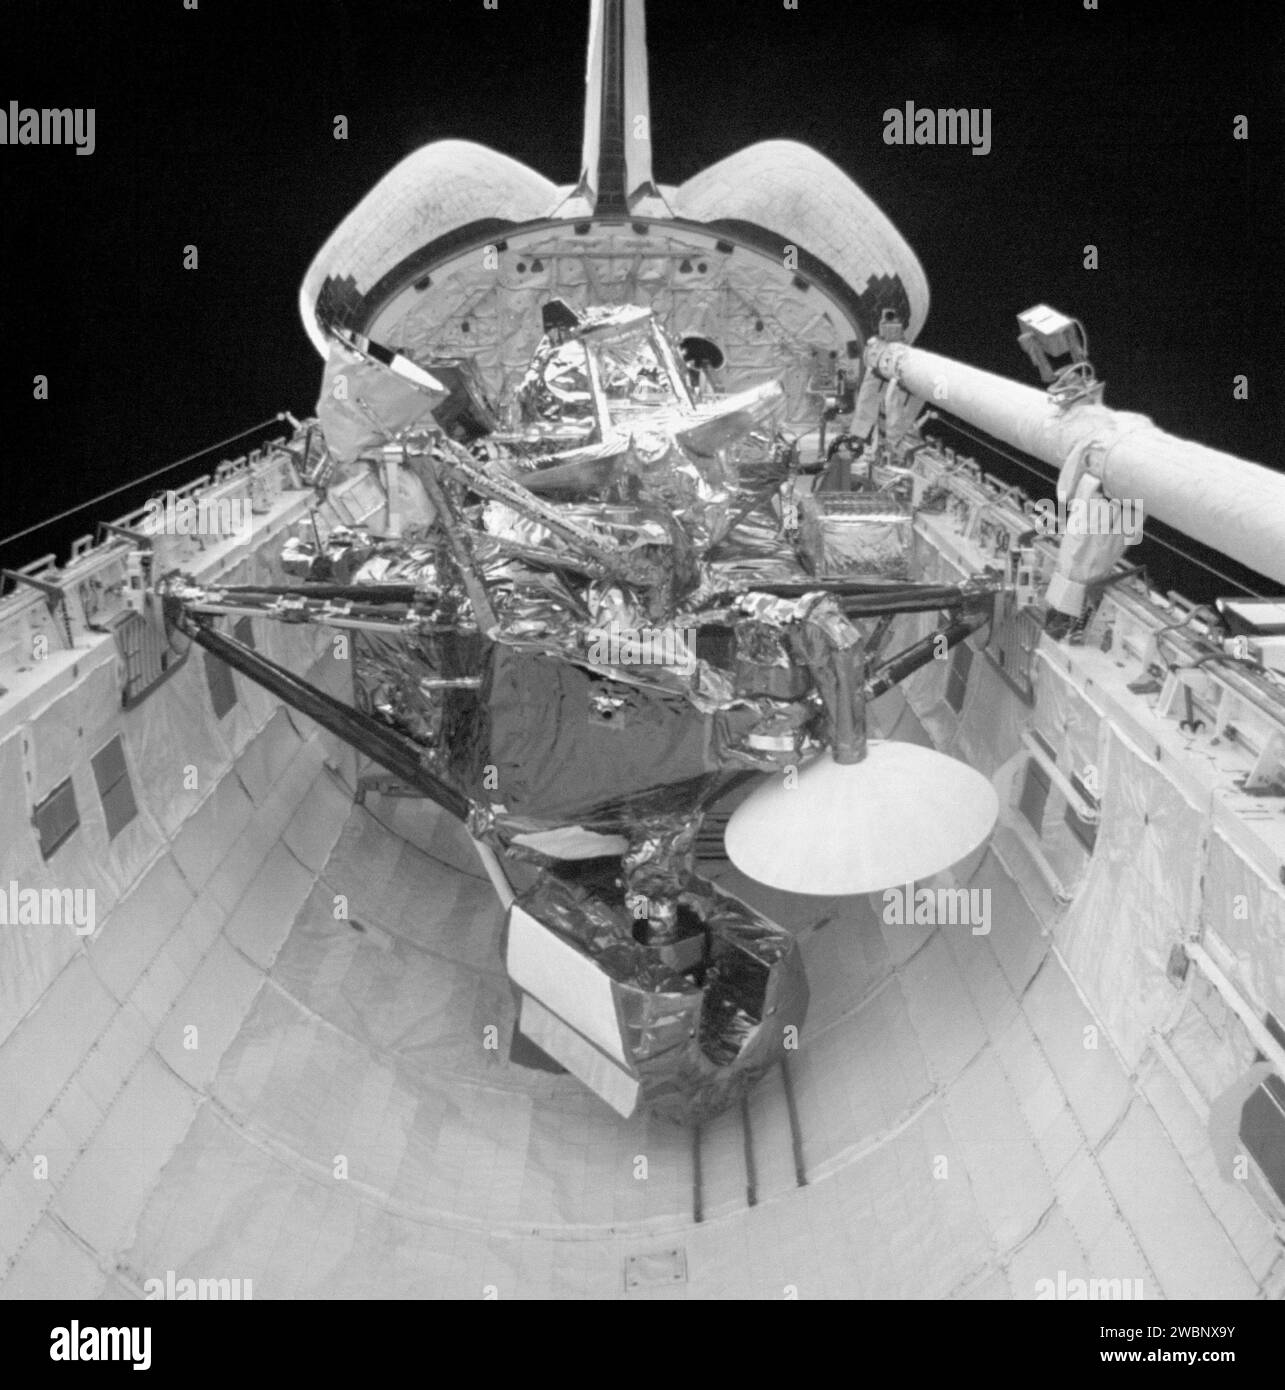 S48-E-013 (15 Sept 1991) ---  The Upper Atmosphere Research Satellite (UARS) in the payload bay of the earth- orbiting Discovery.  UARS is scheduled for deploy on flight day three of the STS-48 mission.  Data from UARS will enable scientists to study ozone depletion in the stratosphere, or upper atmosphere.  This image was transmitted by the Electronic Still Camera (ESC), Development Test Objective (DTO) 648.  The ESC is making its initial appearance on a Space Shuttle flight.   Electronic still photography is a new technology that enables a camera to electronically capture and digitize an ima Stock Photo